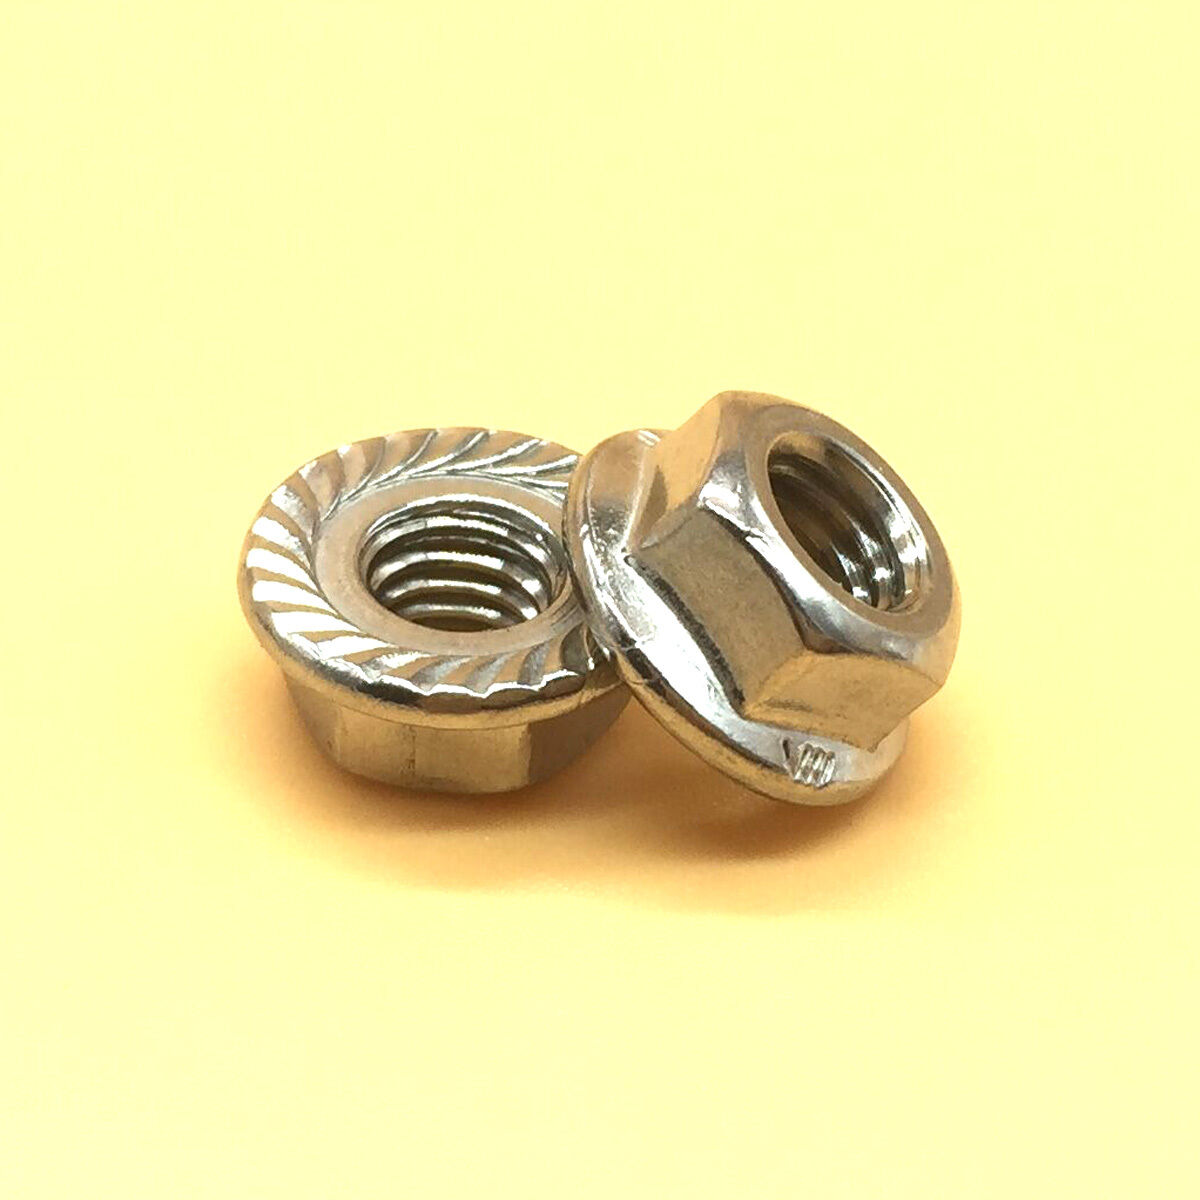 12 Pcs M10 x 1.5 Stainless Steel Flange Hex Nut Right Hand Thread [M_M_S]